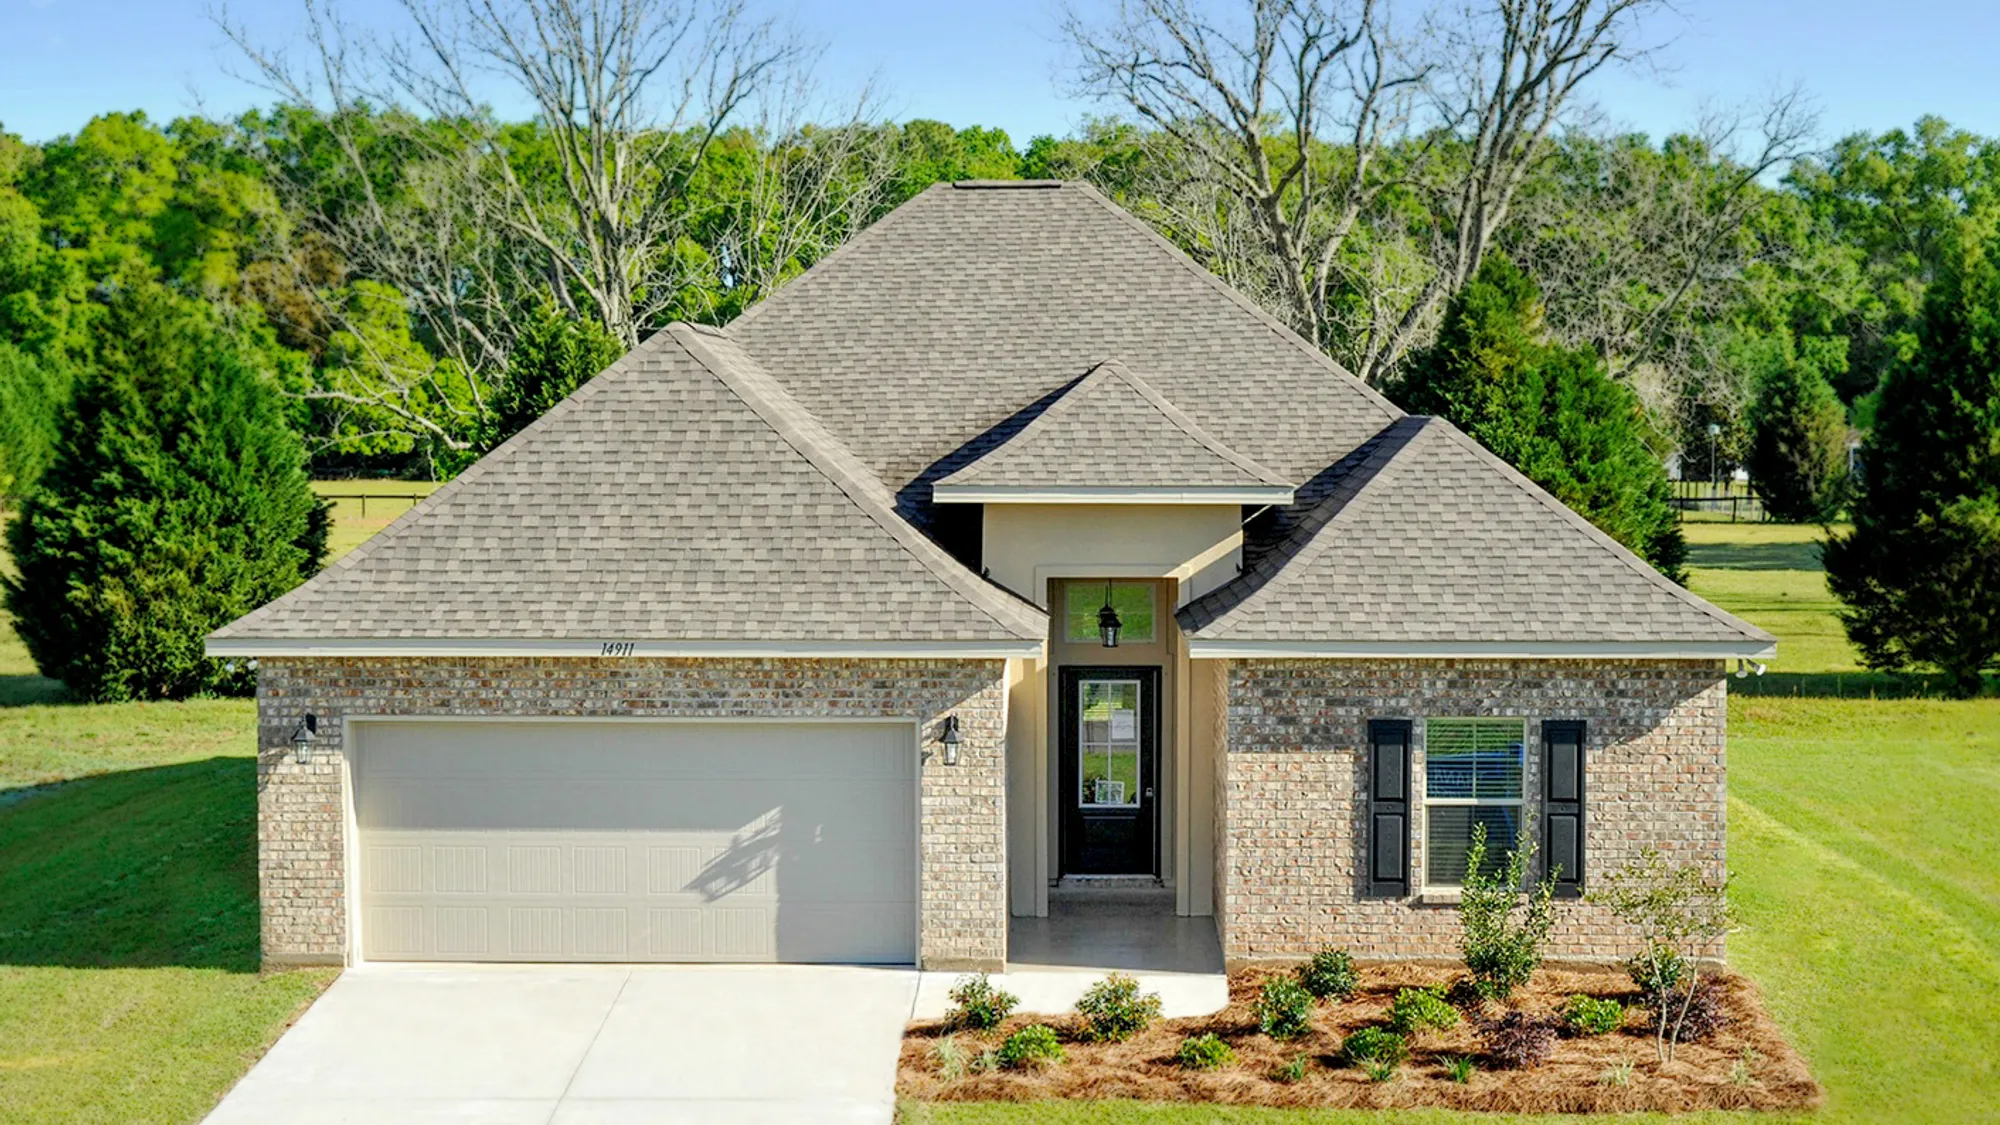 New Homes for Sale in Silverhill, AL by DSLD Homes